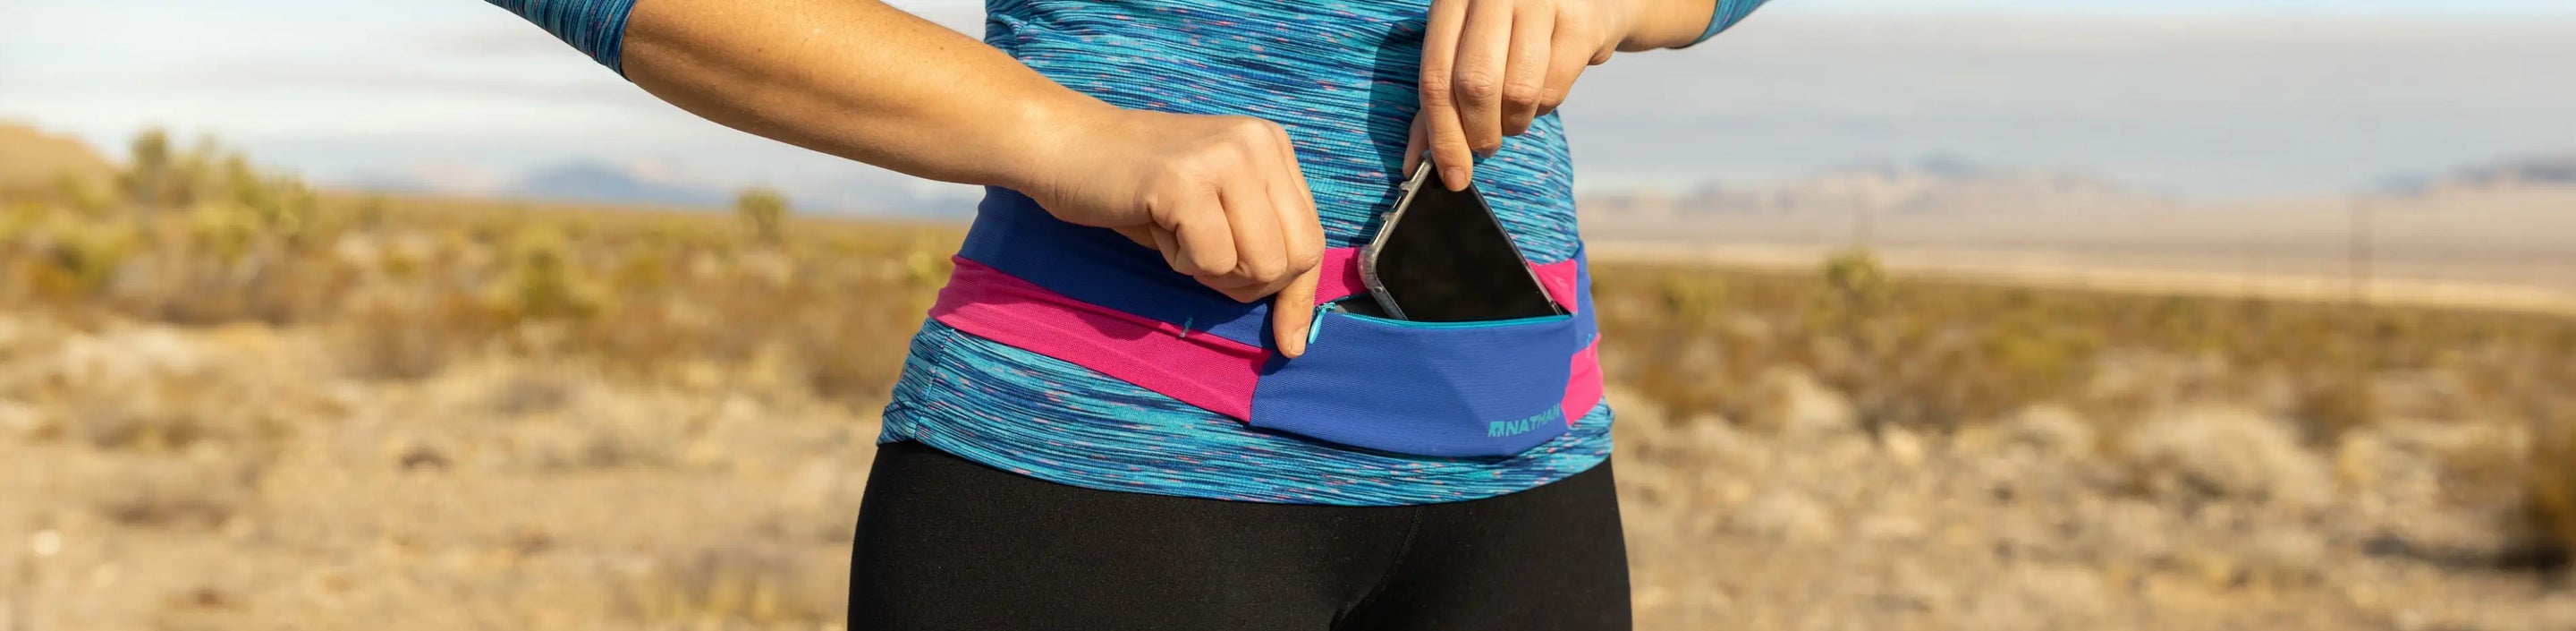 athlete wearing Nathan Sports Zipster Lite running belt putting phone into the zip pouch